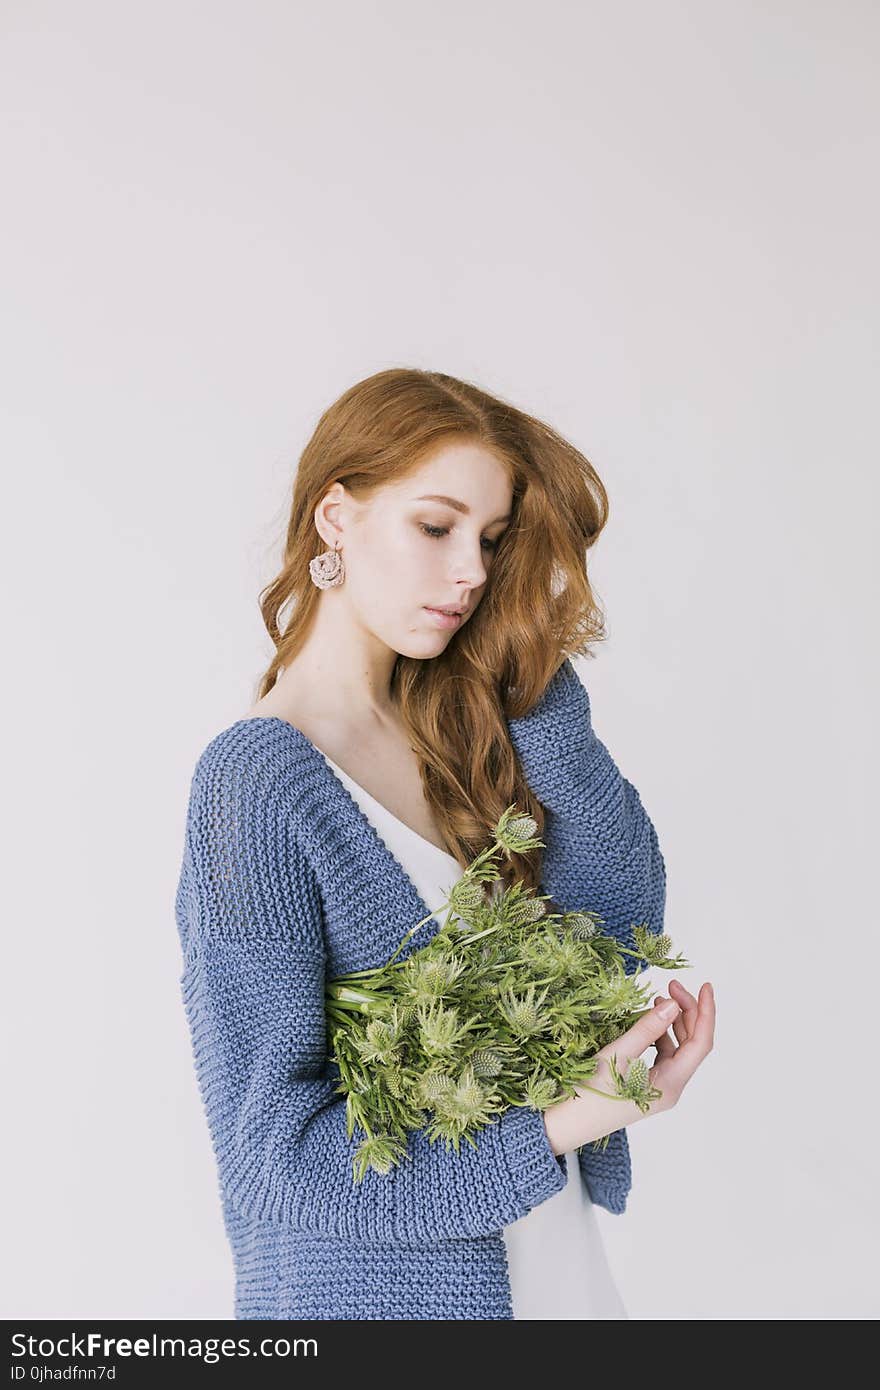 Woman in Blue Cardigan Holding Green Flowers